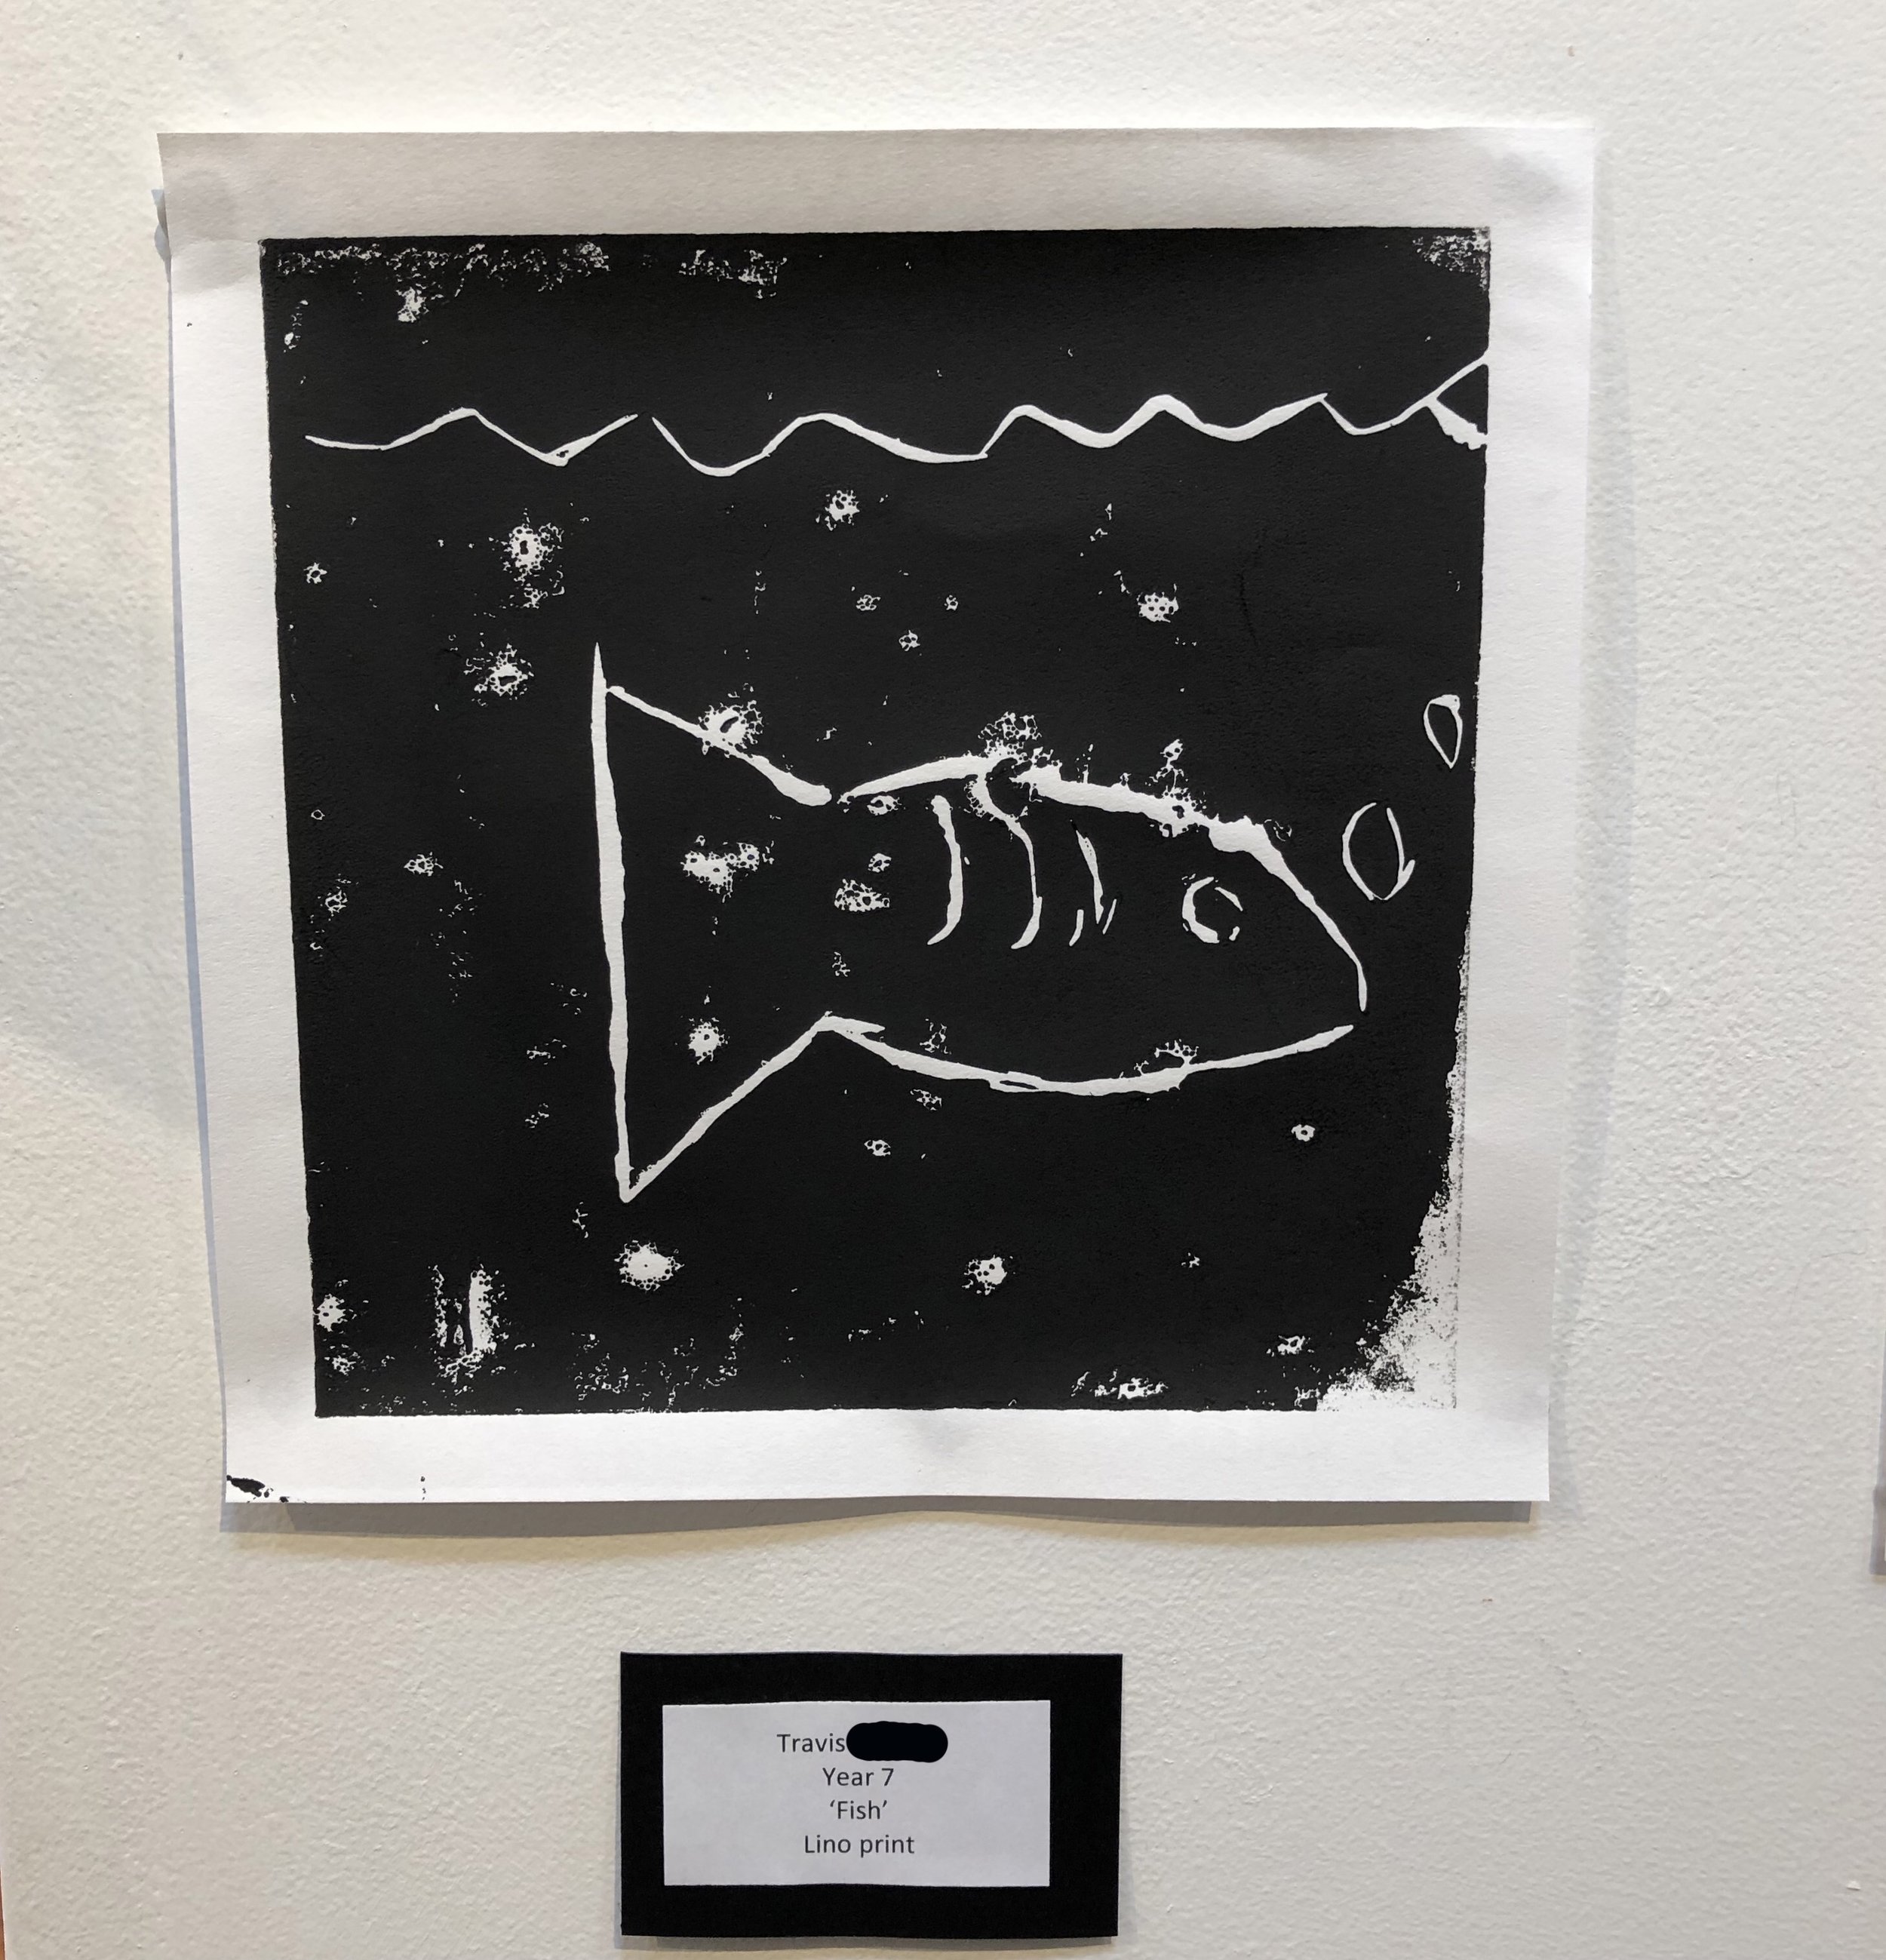 "Fish" by Travis (Year 7)